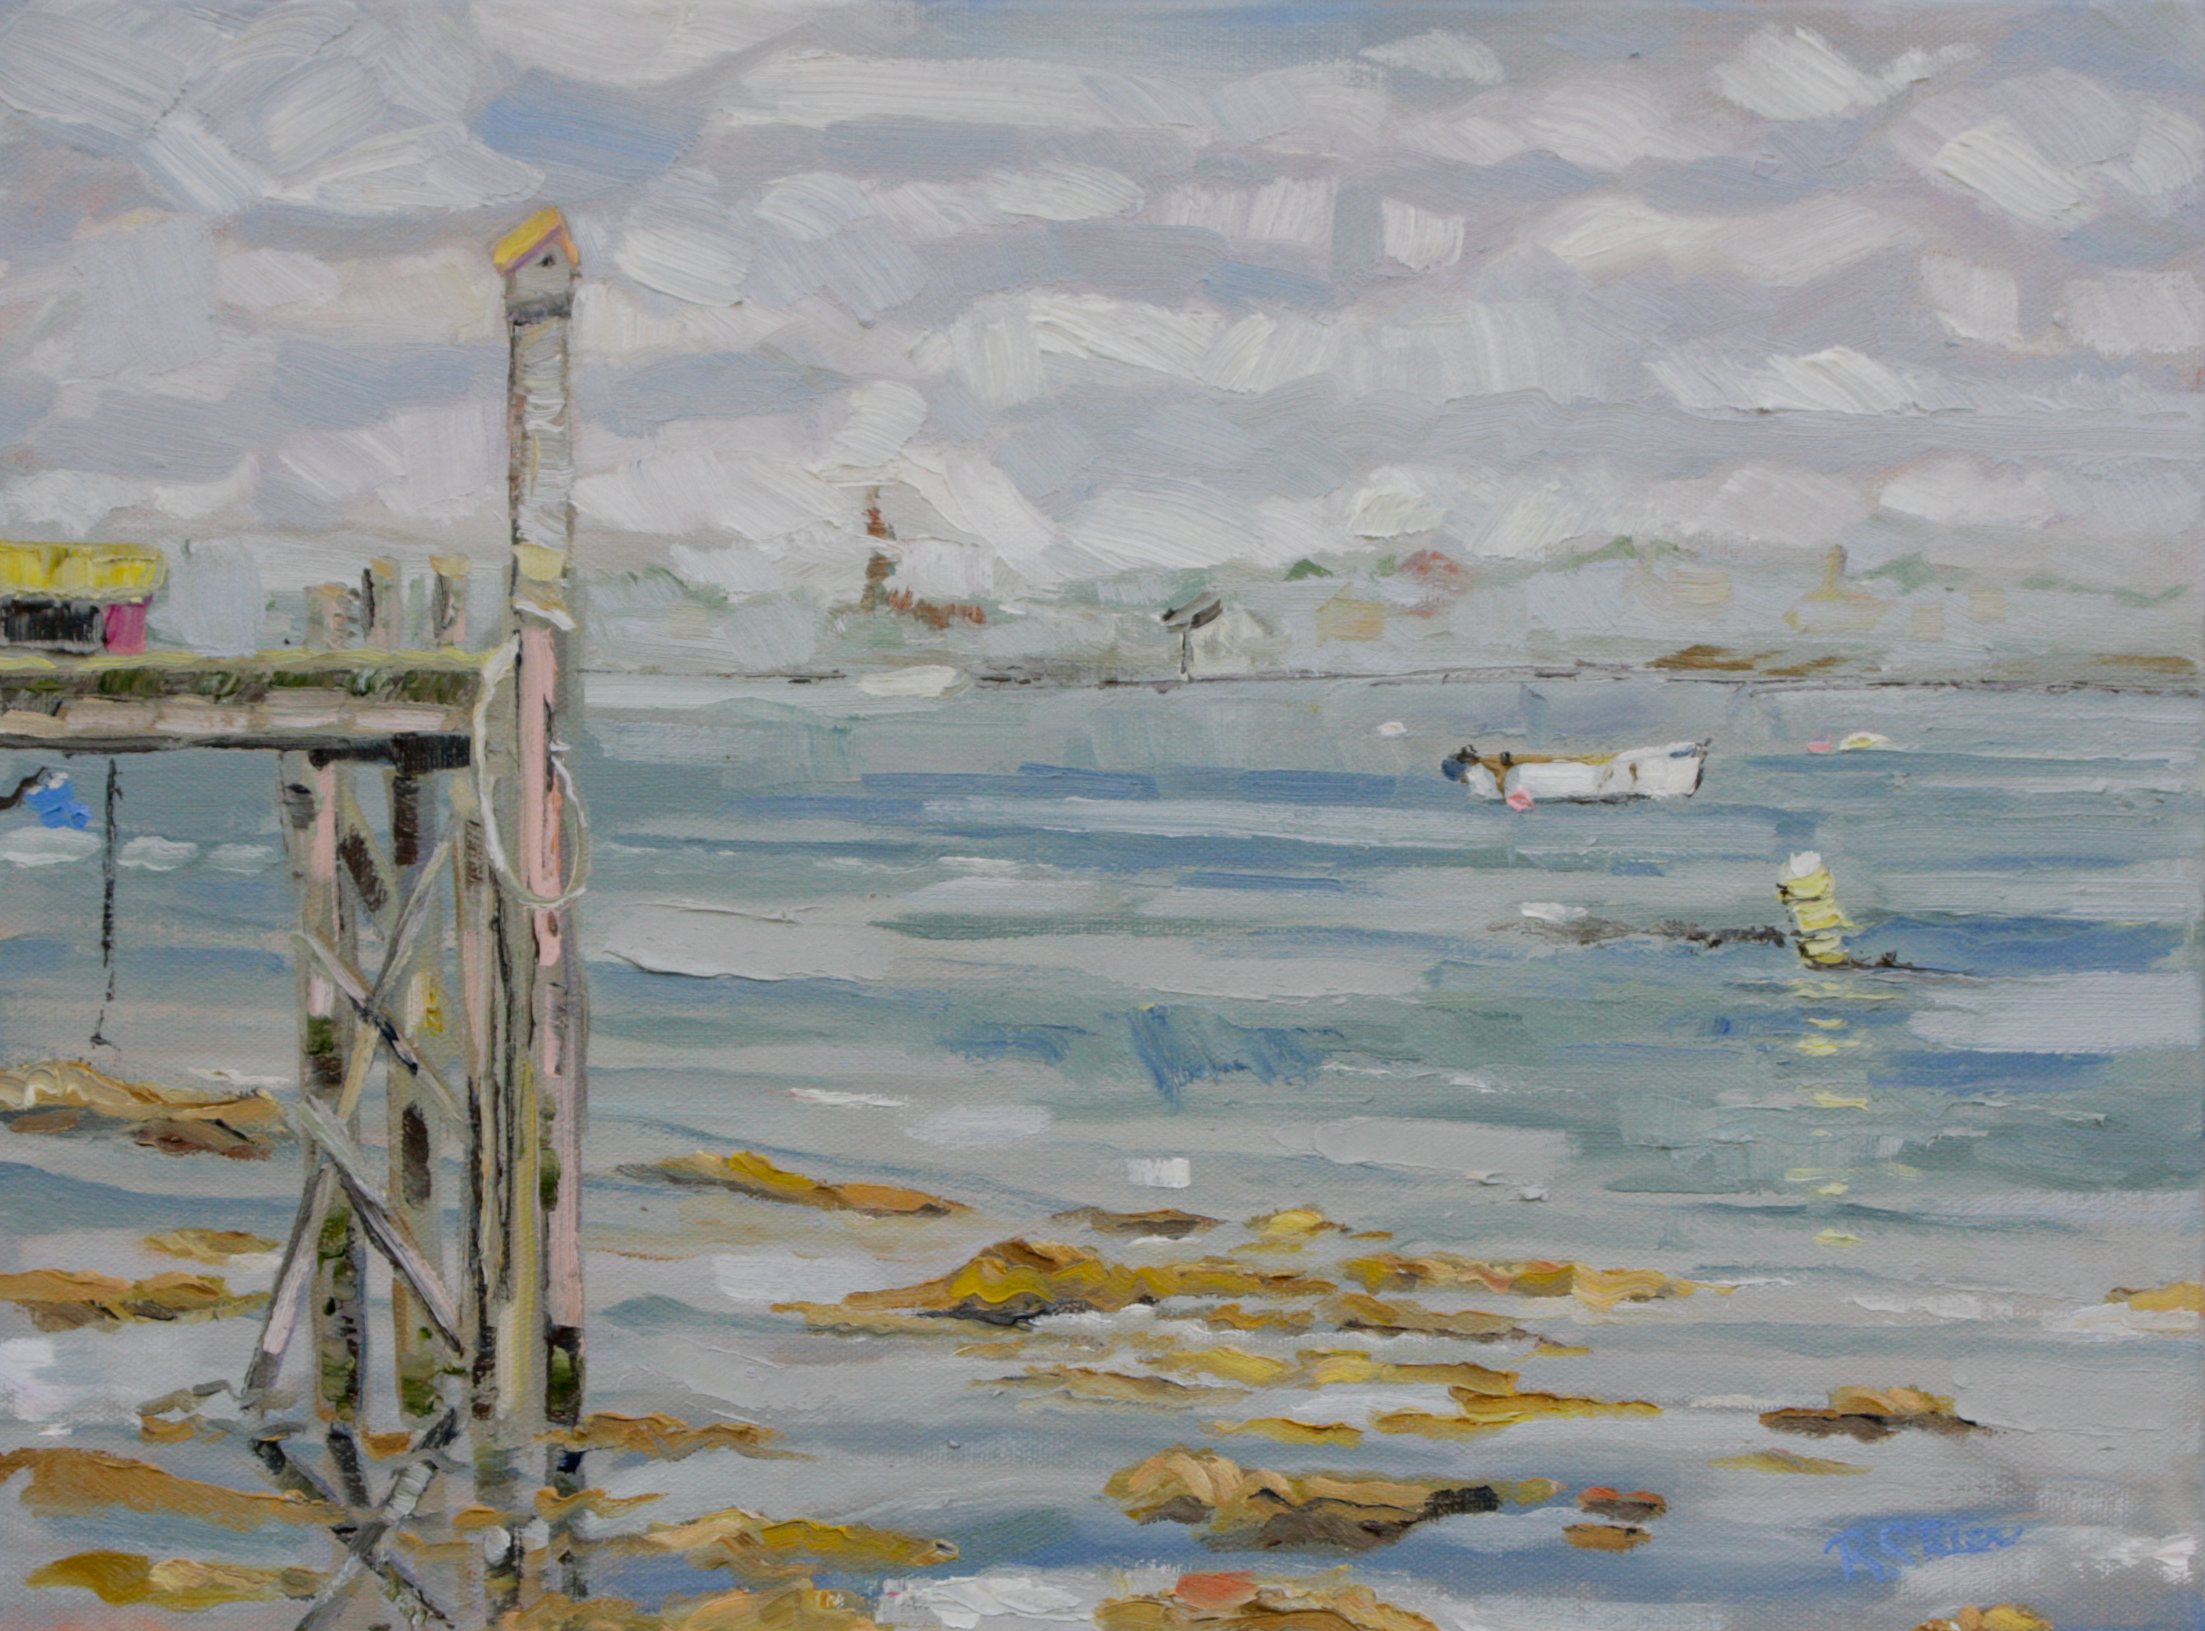 from Willis Beal’s Beach, Fog 12in x 16in $650